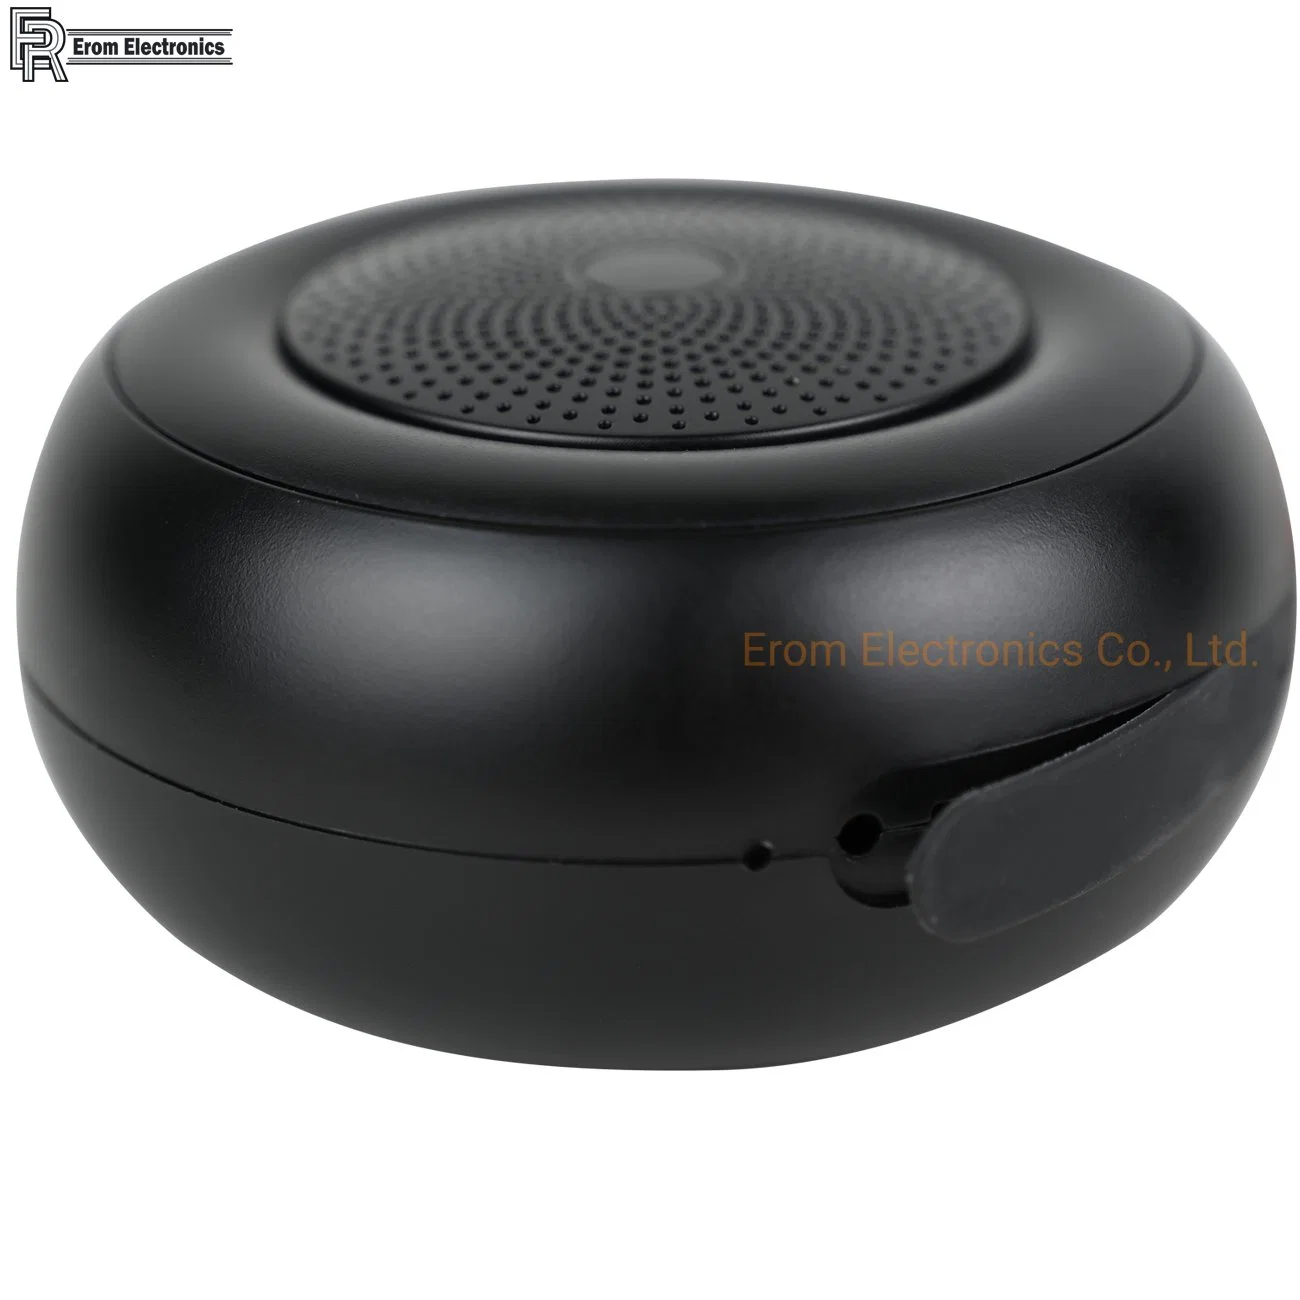 Shenzhen Factory Audio Stereo Portable Sound Box Waterproof Mini Bluetooth Speaker Support Dual Speaker Pair Connection